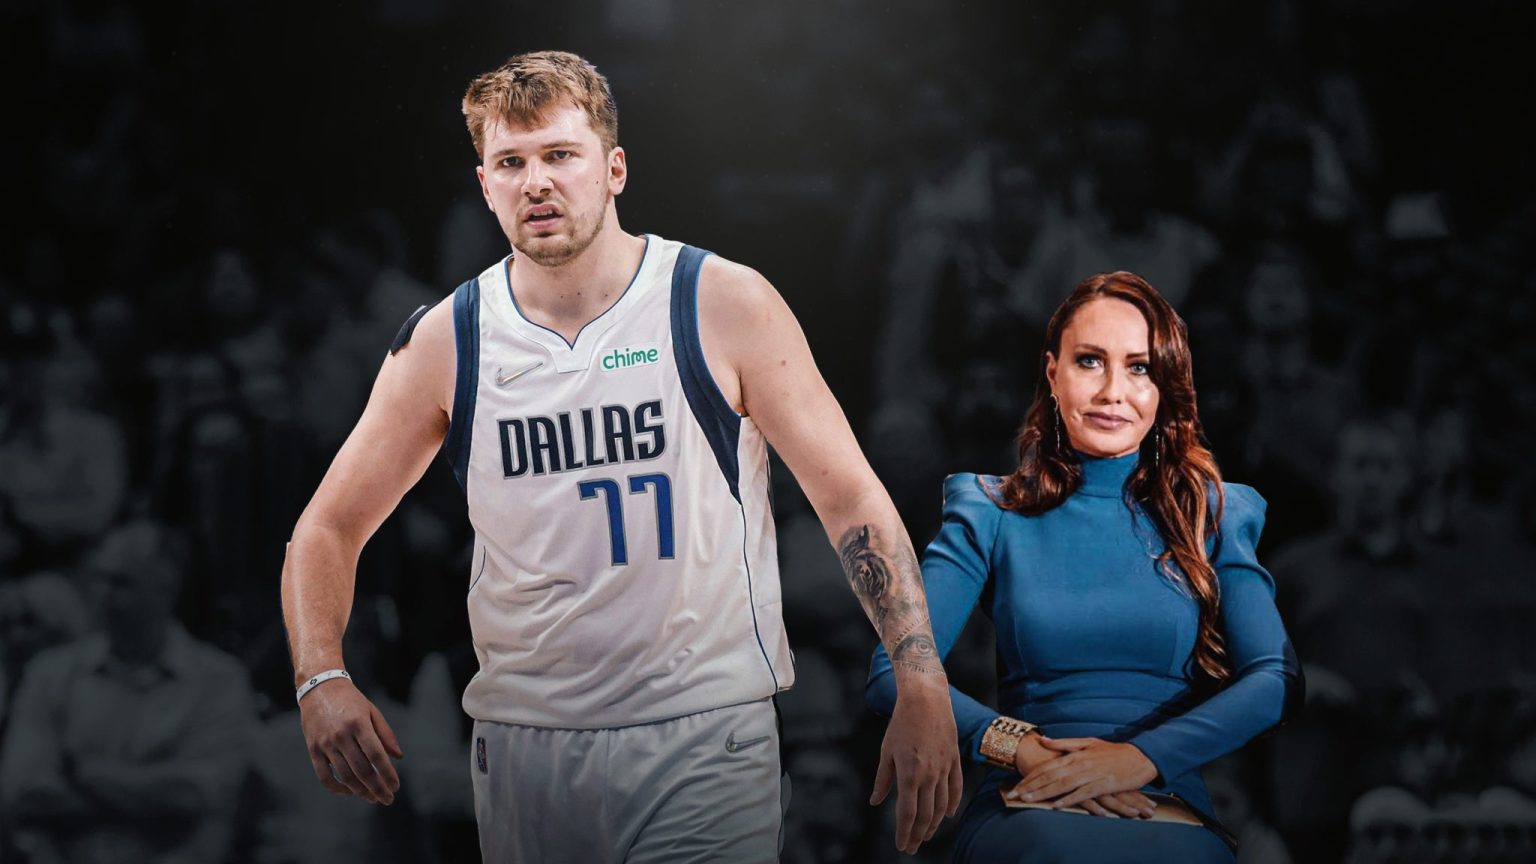 luka mom Cropped scaled 1 NBA player Luka Doncic's legal dispute with his mother